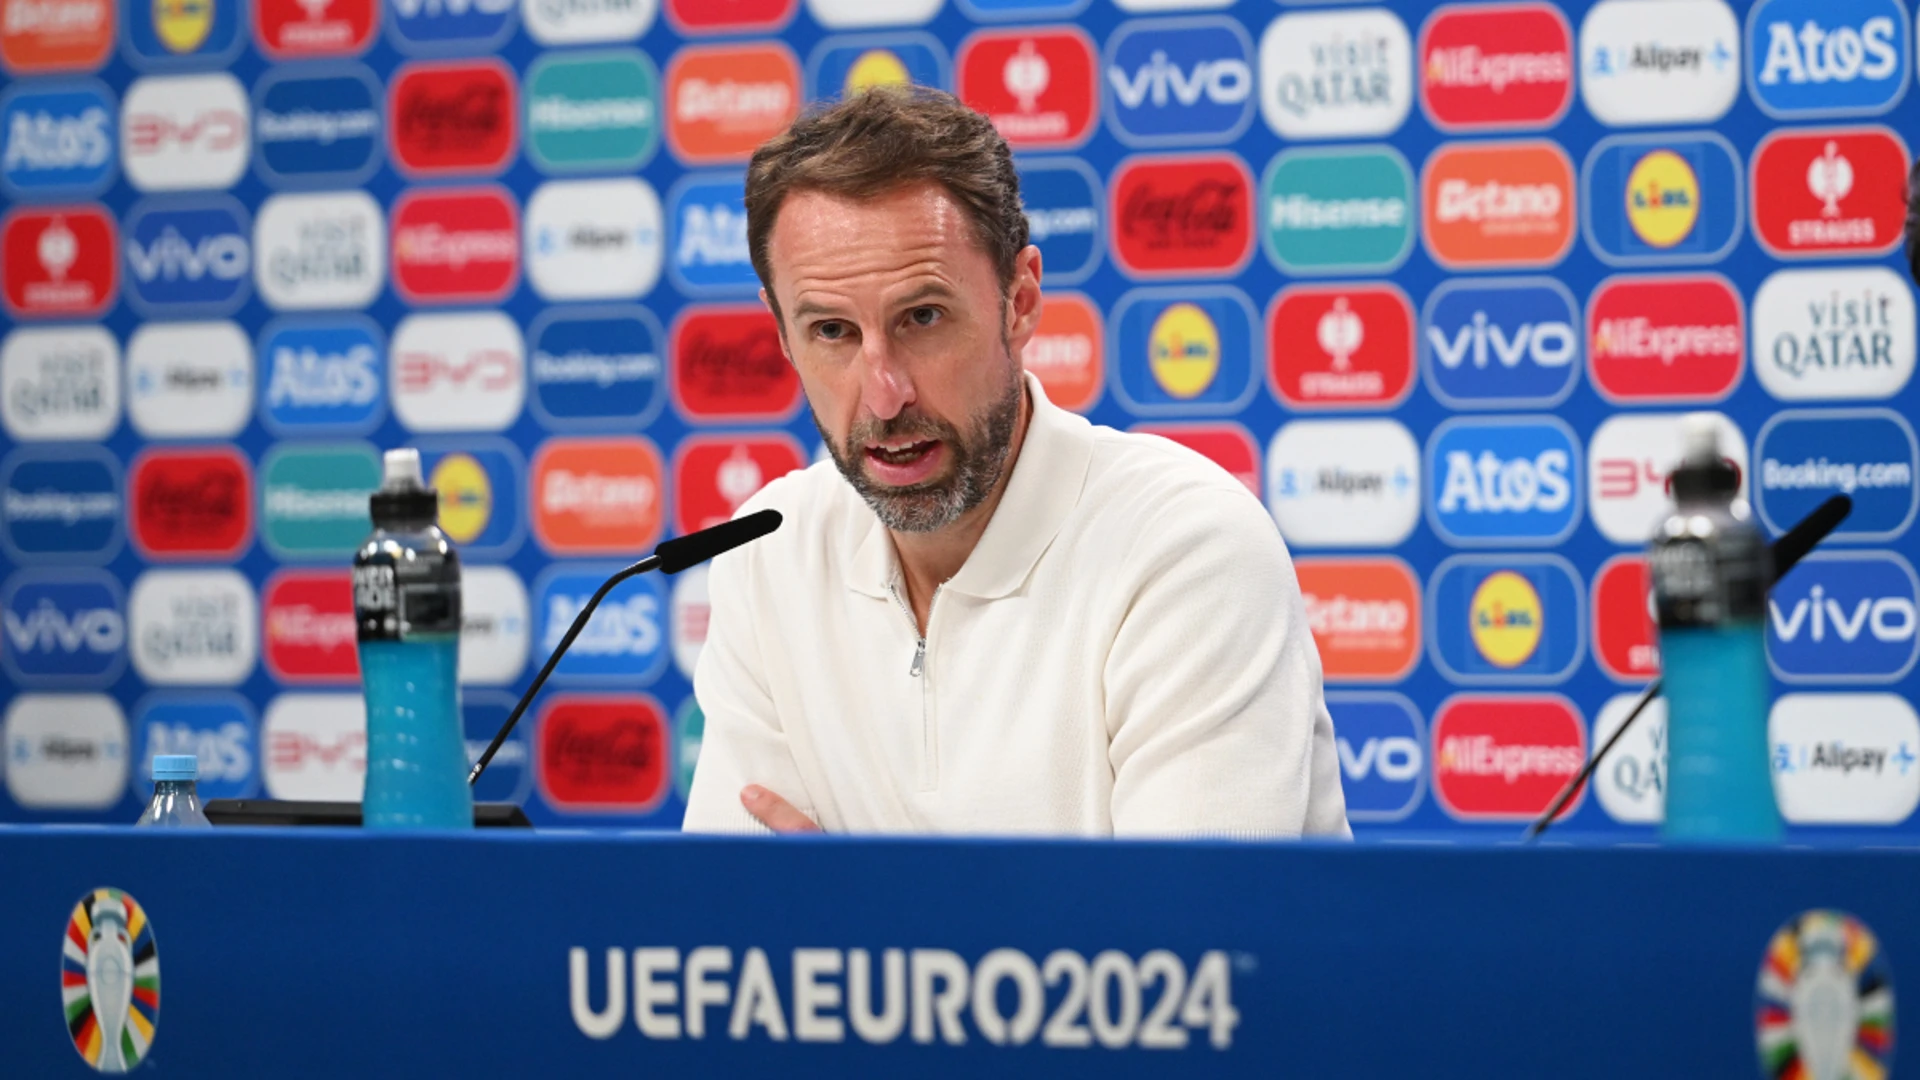 England have to reach 'different level' to meet Euros objective: Southgate